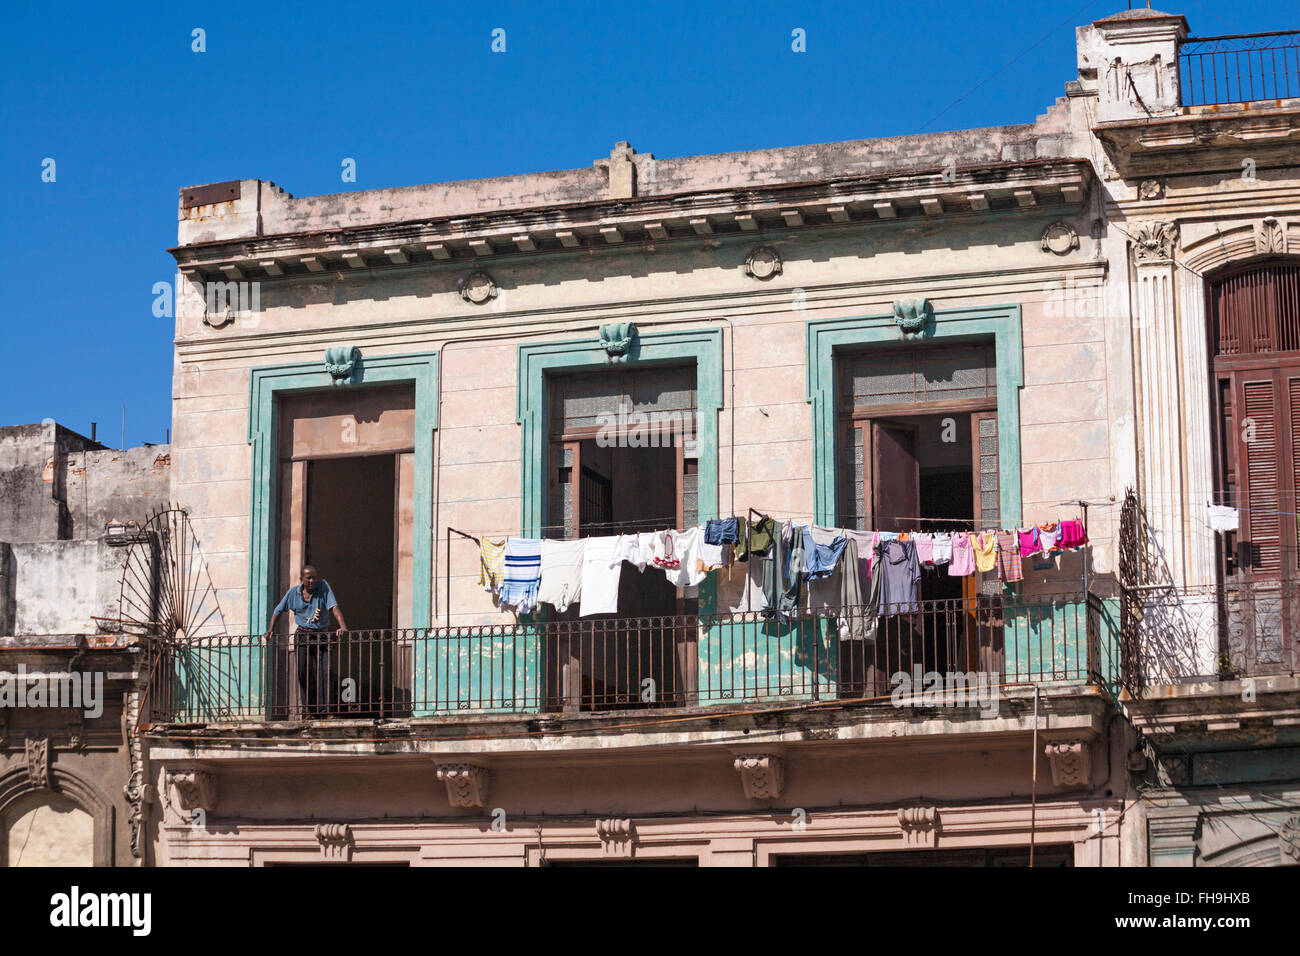 Daily life in Cuba - Cuban man with clothes pegs on t-shirt leaning on balcony railings with washing on line drying at Havana, Cuba, West Indies Stock Photo